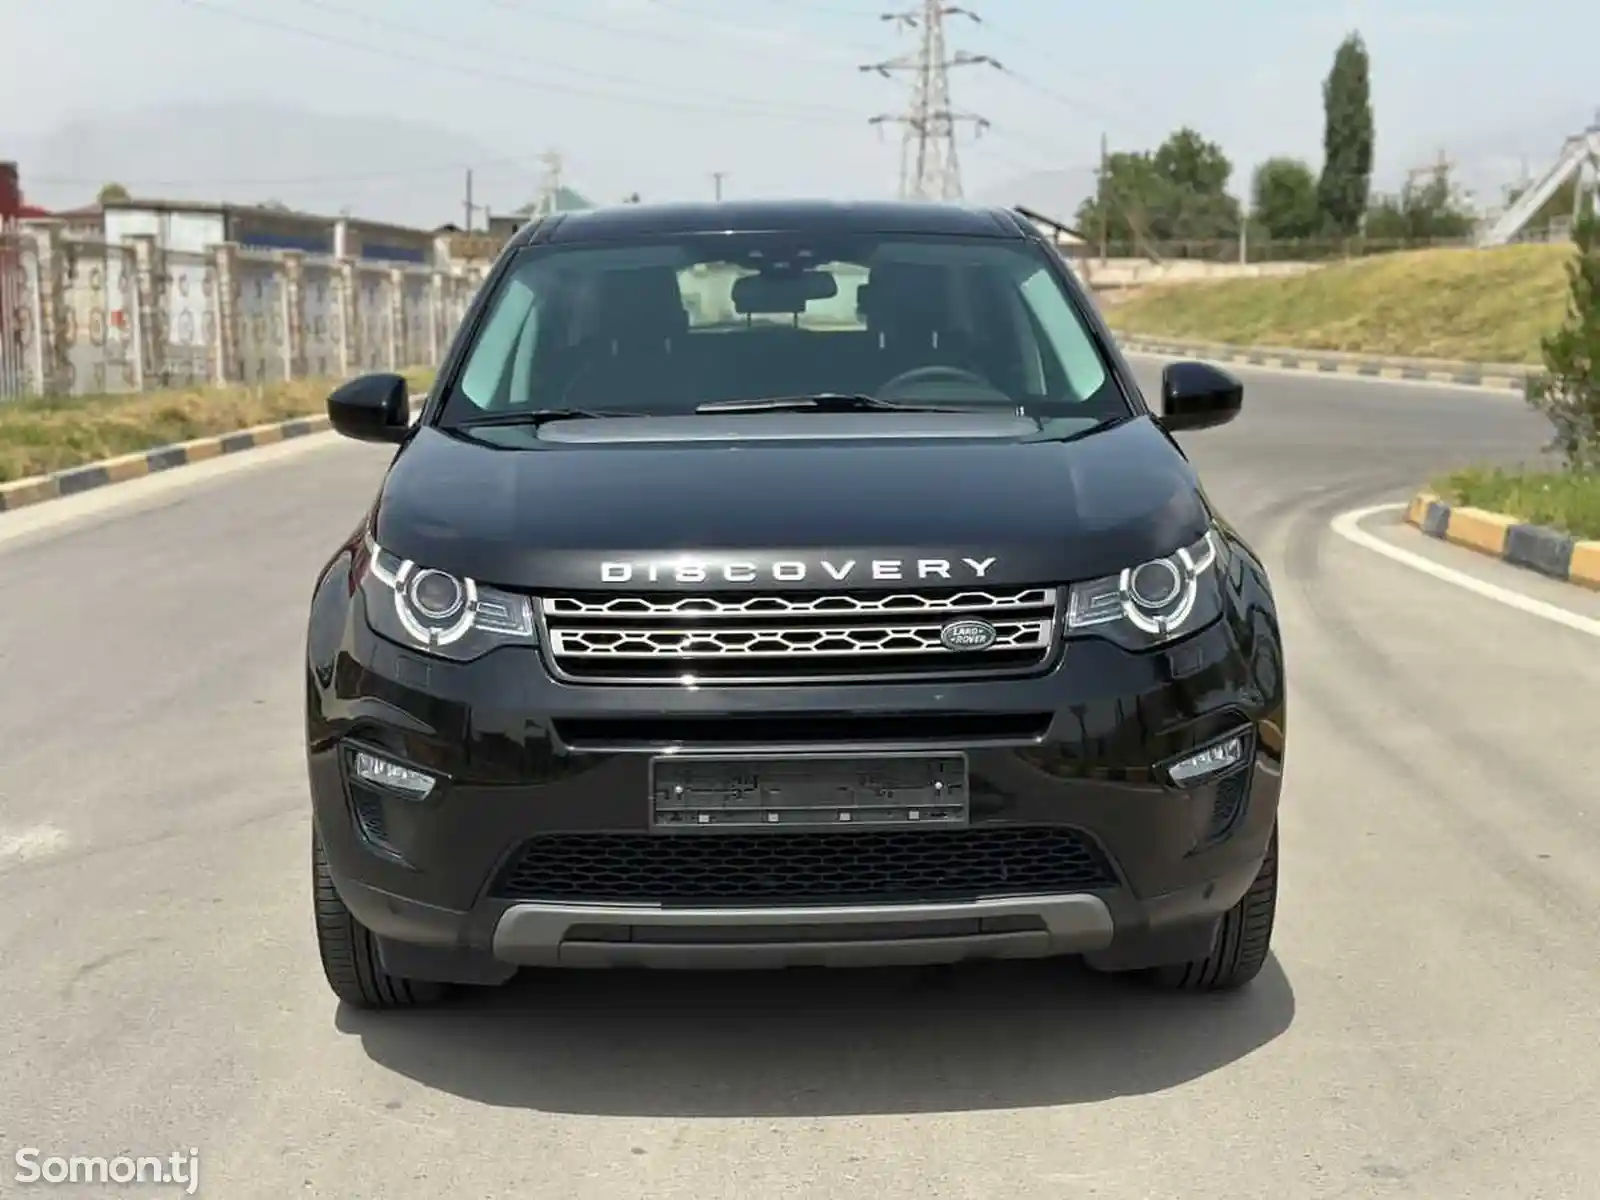 Land Rover Discovery, 2018-3